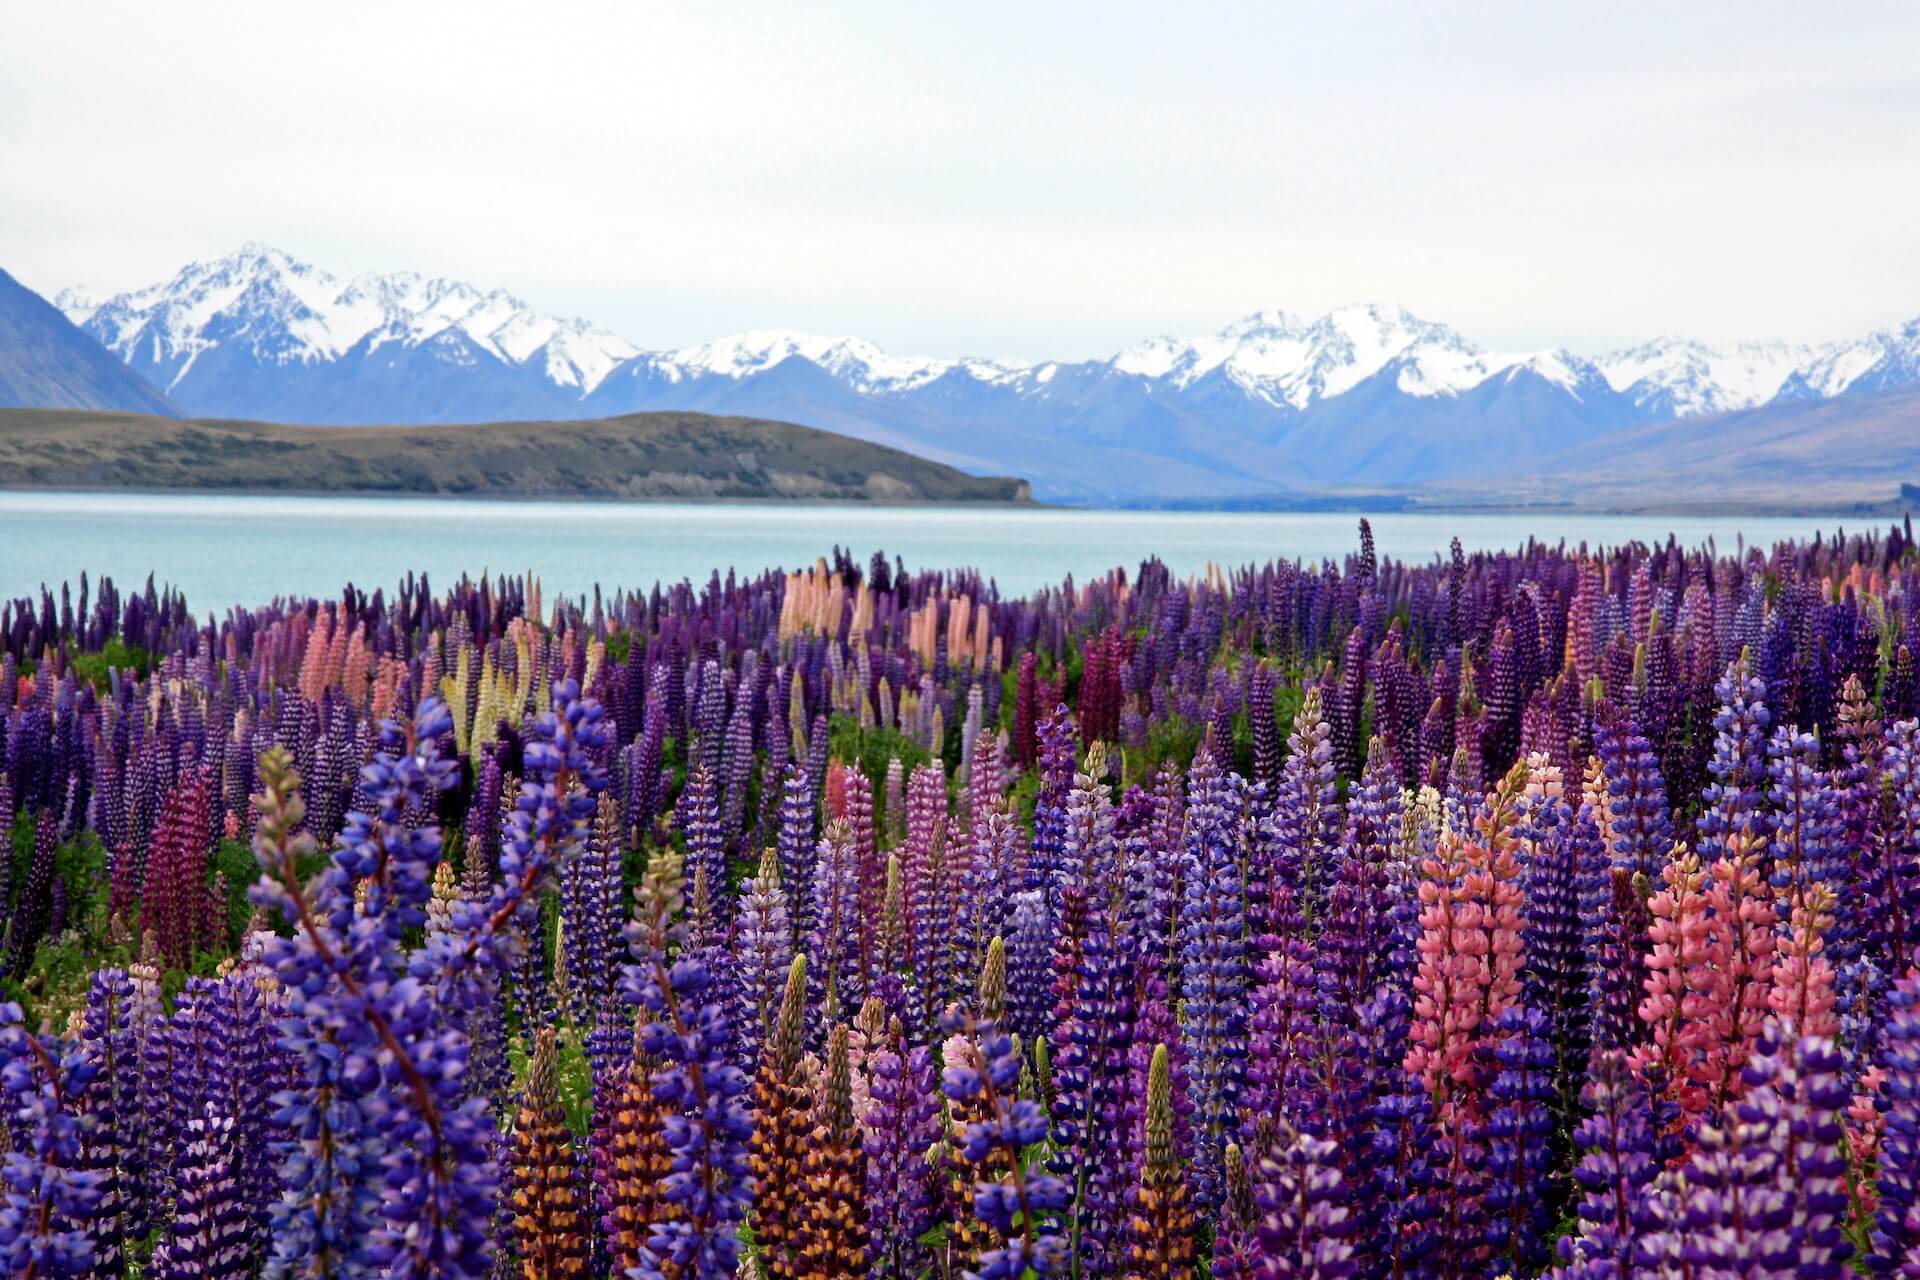 Attractions in New Zealand